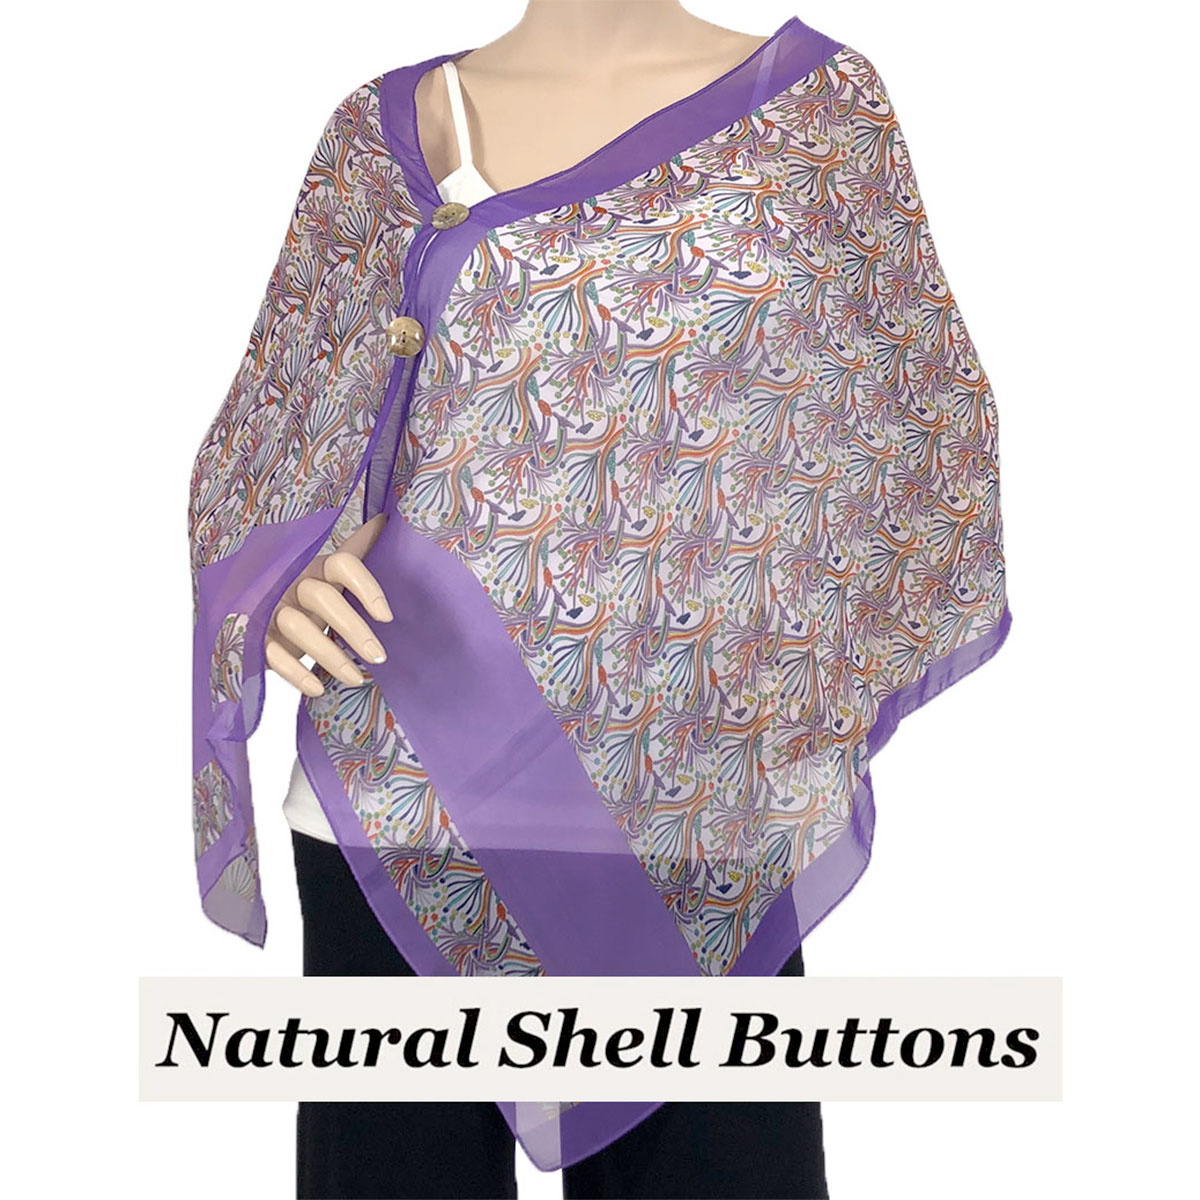 SBS-012PU Shell Buttons<br> Purple Paisley Mix MB